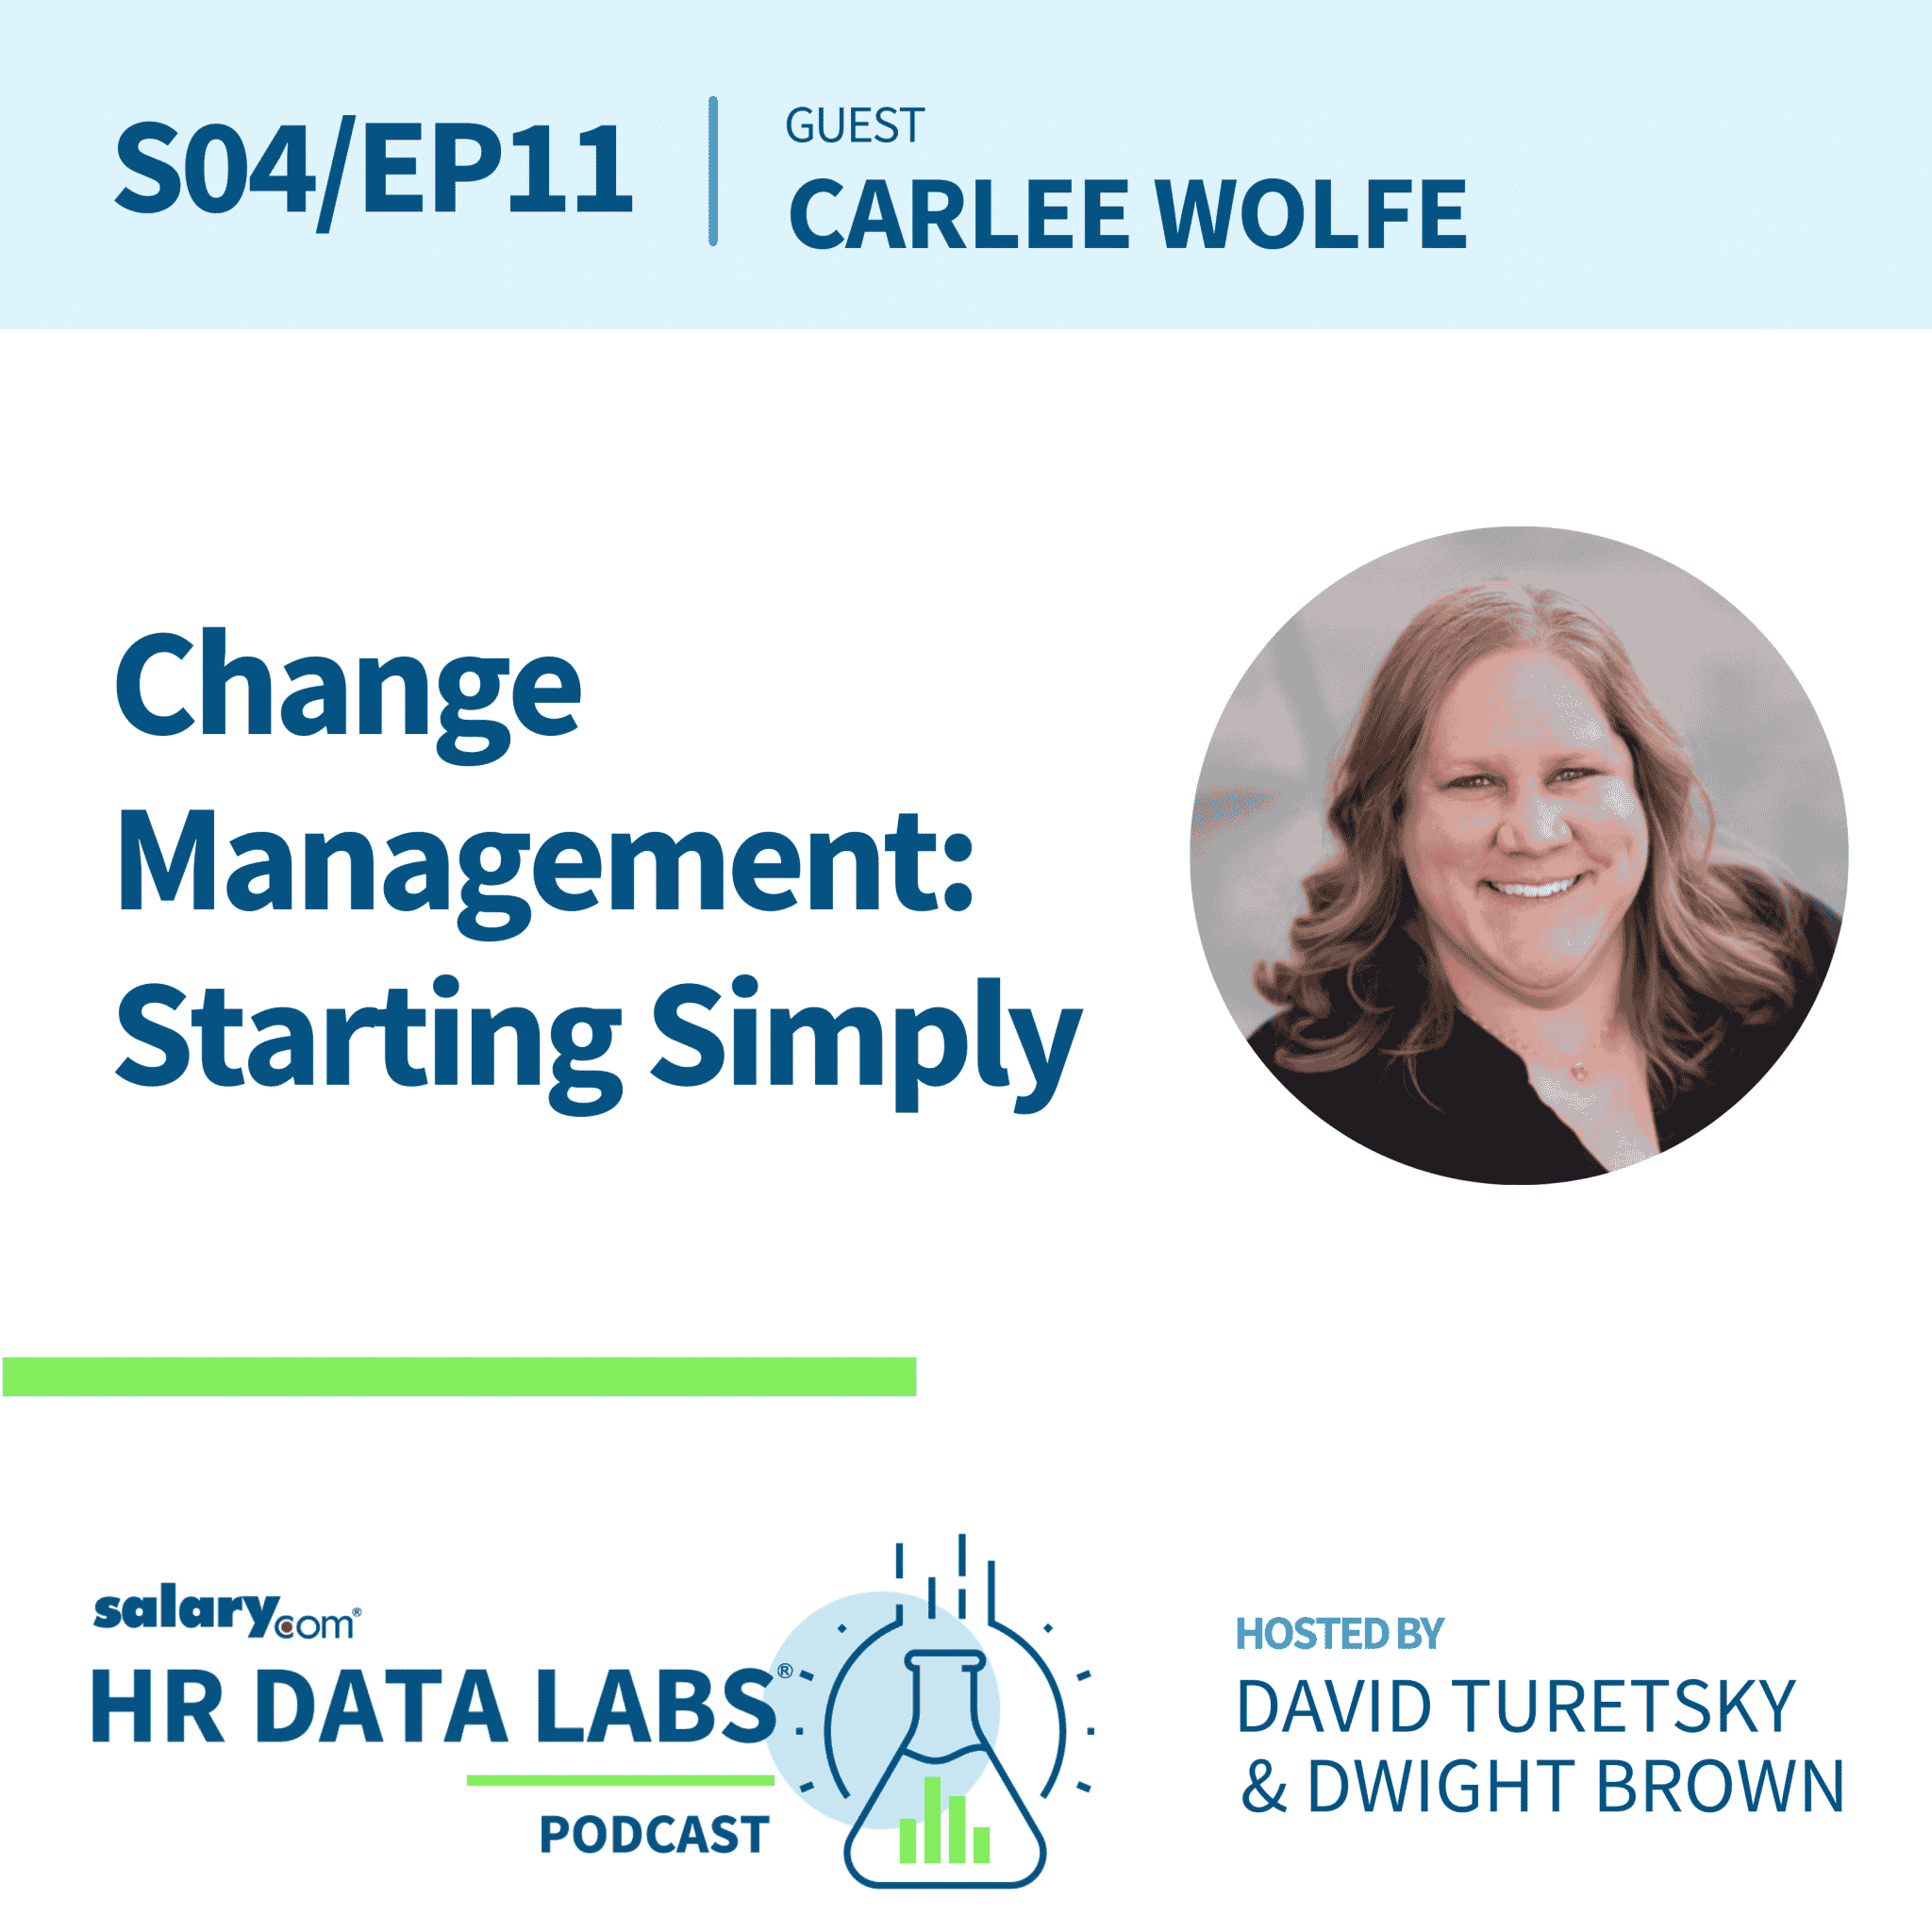 Carlee Wolfe – Change Management: Starting Simply